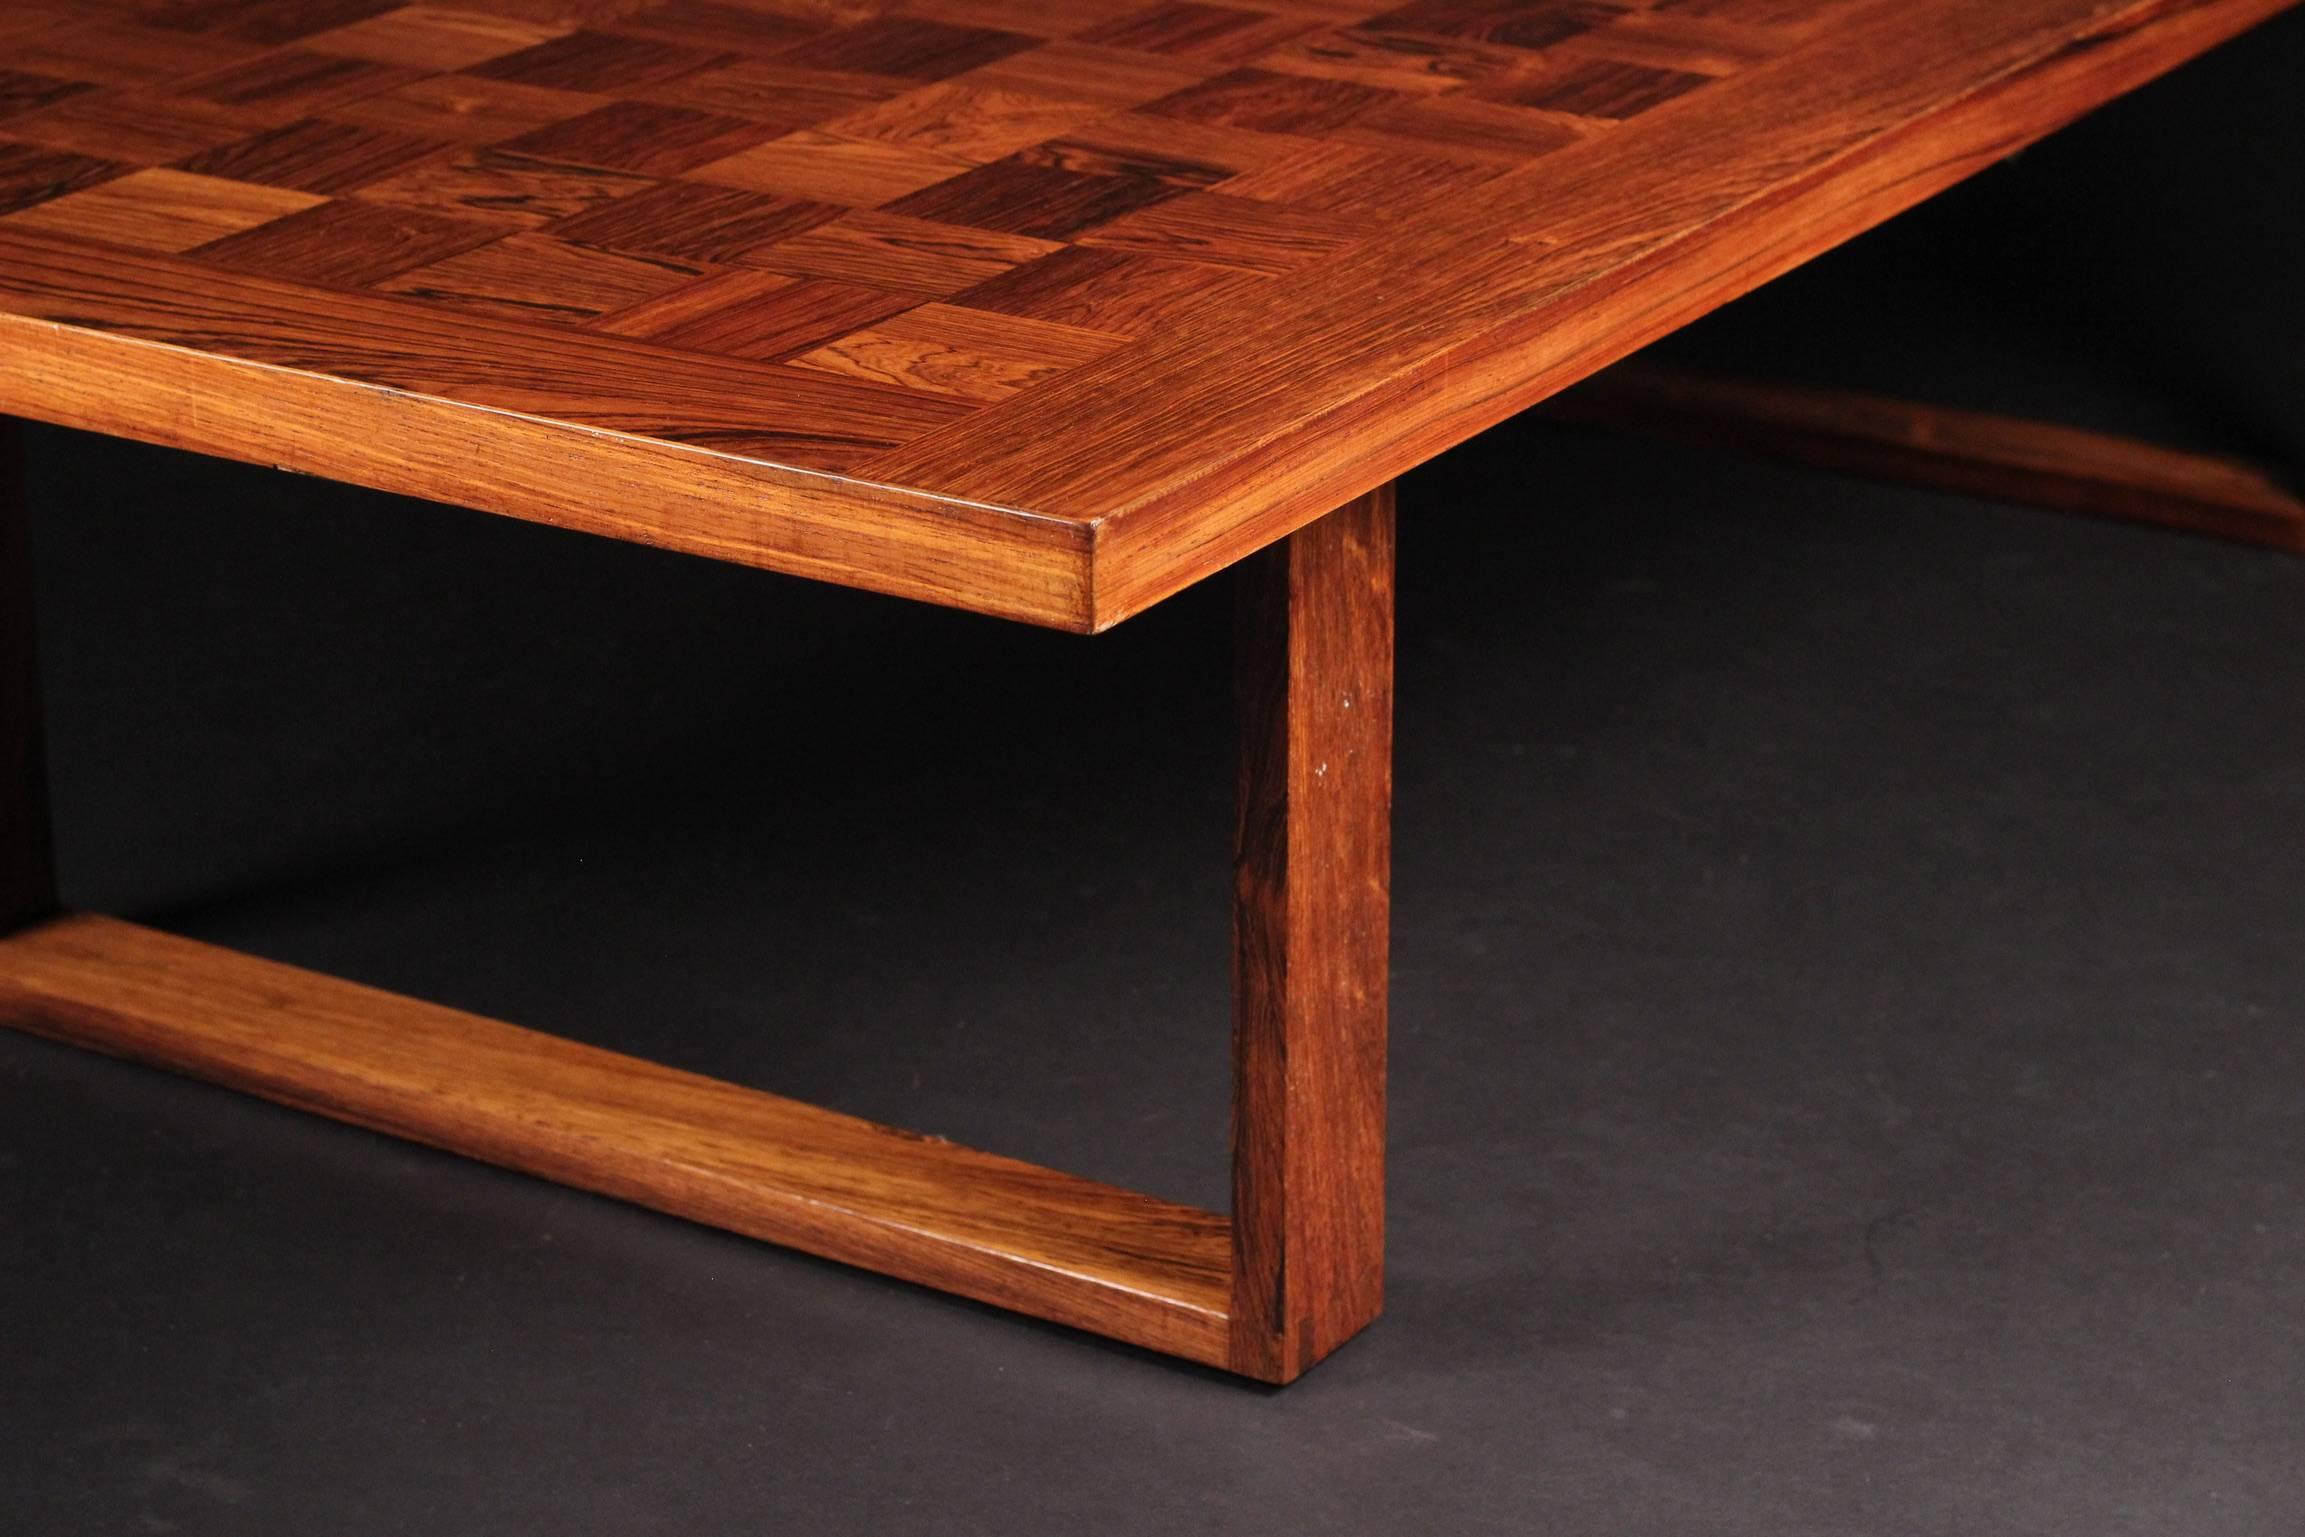 Mid-20th Century Scandinavian Modern Rosewood Cocktail or Coffee Table Designed by Poul Cadovius